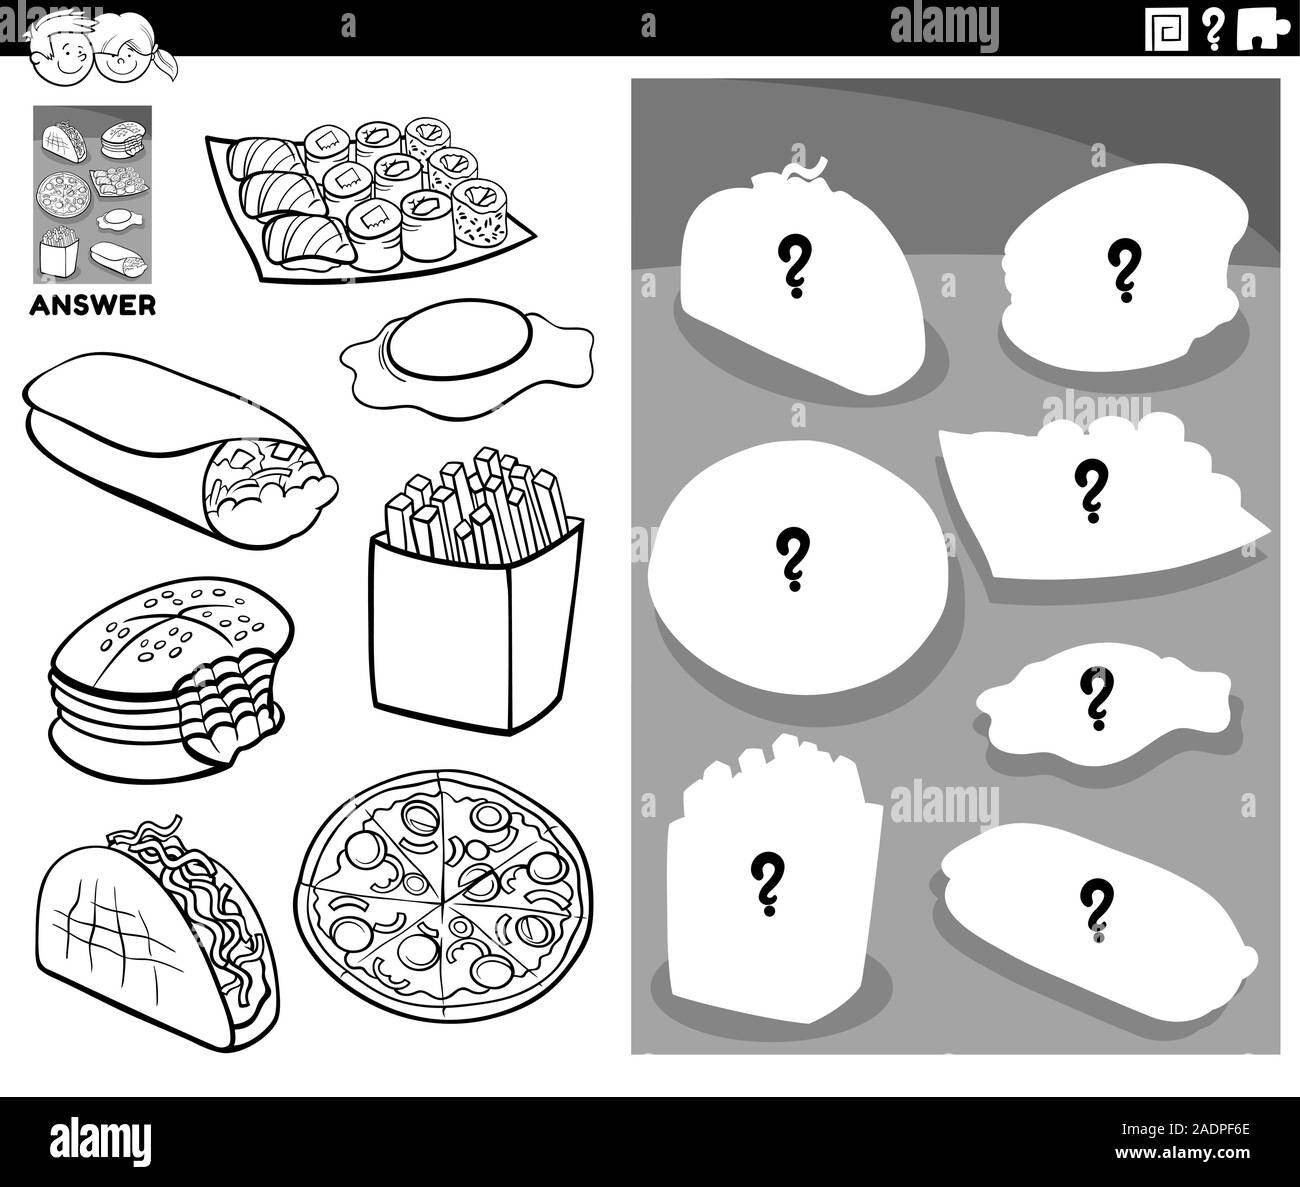 Black and White Cartoon Illustration of Match Objects and the Right Shape or Silhouette with Food Objects Educational Game for Children Coloring Book Stock Vector